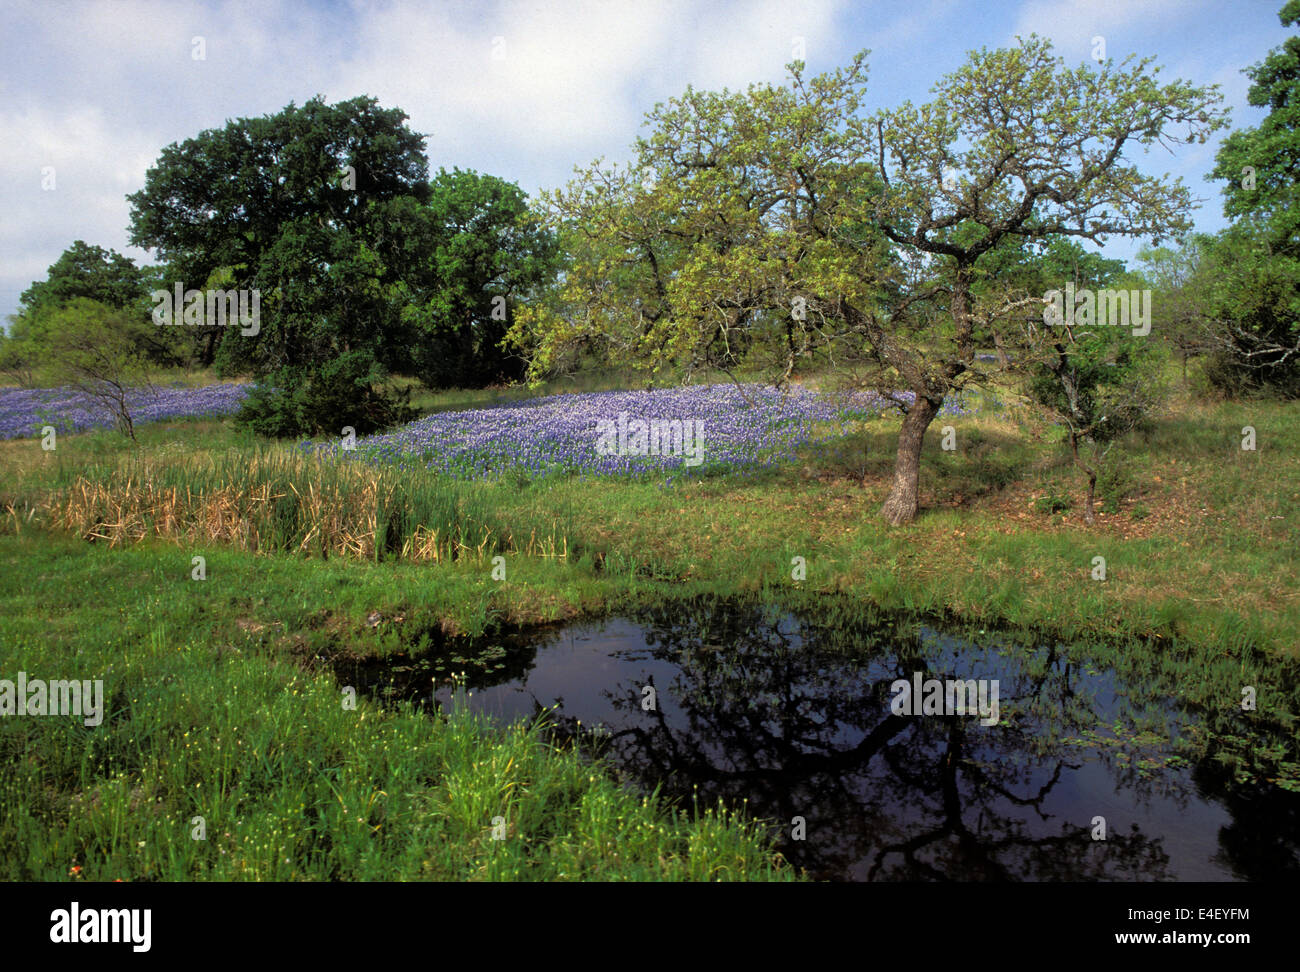 Bluebonnets Growing near Small Pond in Burnet County, Texas Stock Photo